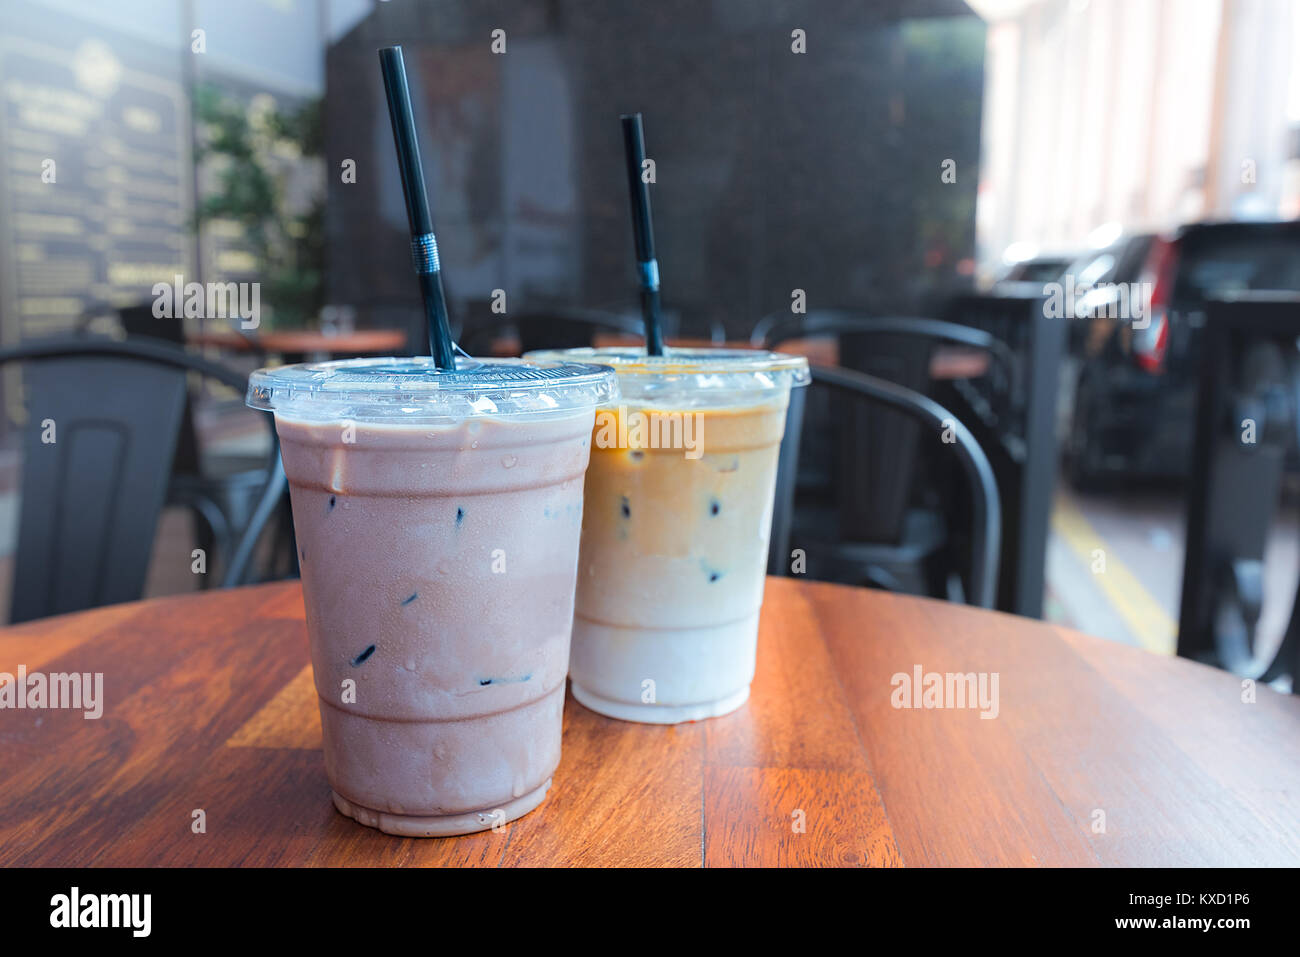 https://c8.alamy.com/comp/KXD1P6/iced-mocha-and-iced-latte-coffee-drinks-in-clear-plastic-cups-with-KXD1P6.jpg